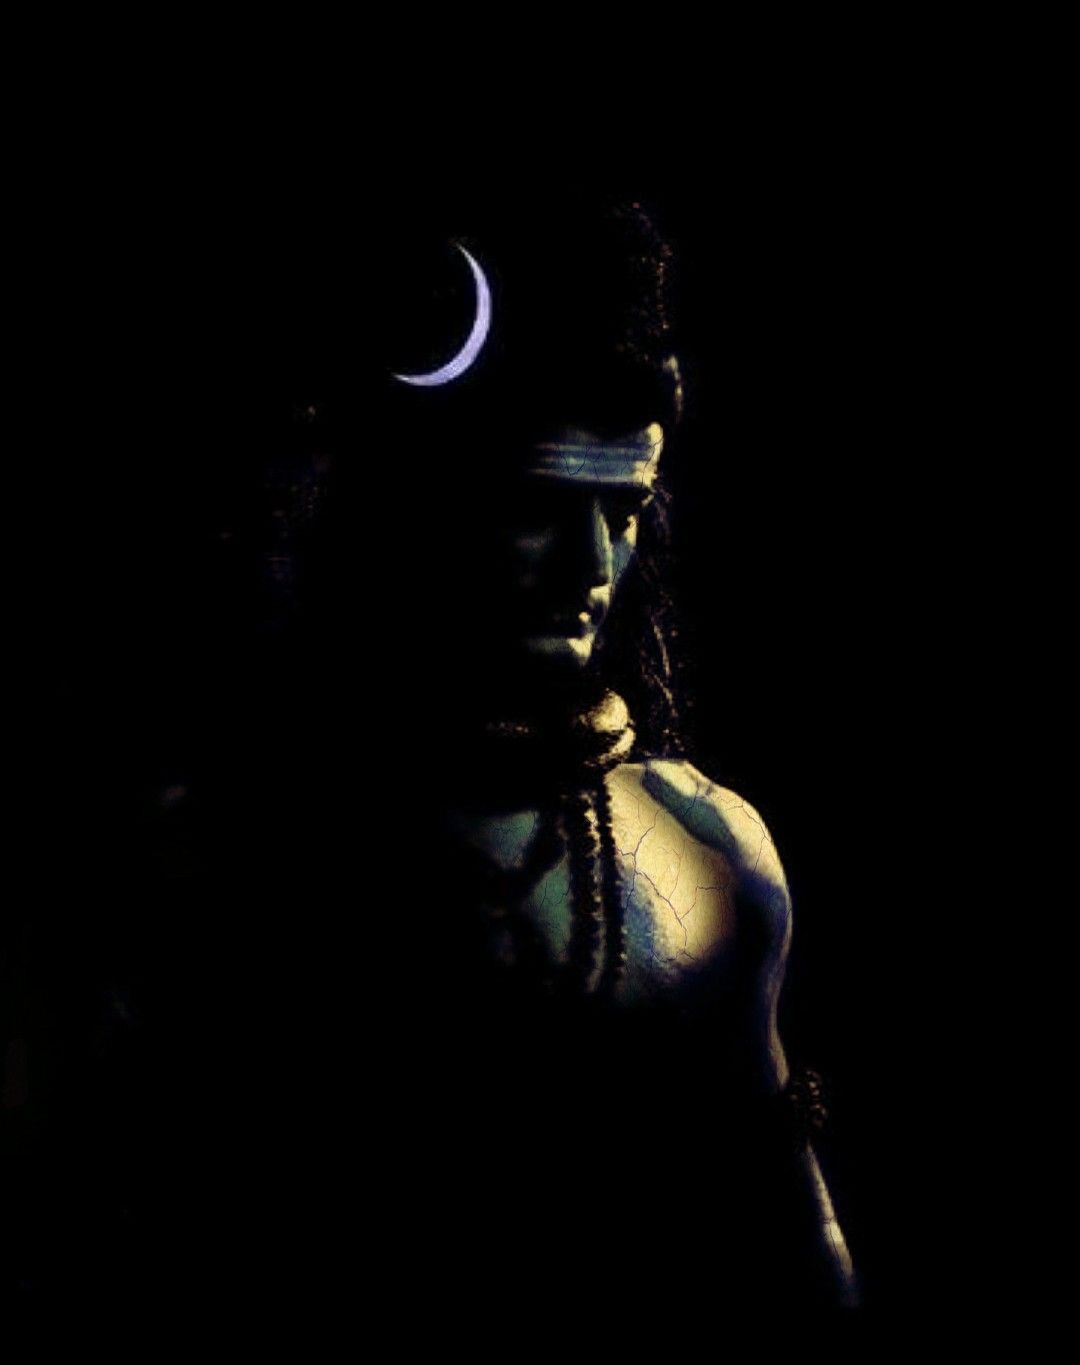 Mahadev Images Photos Pictures HD